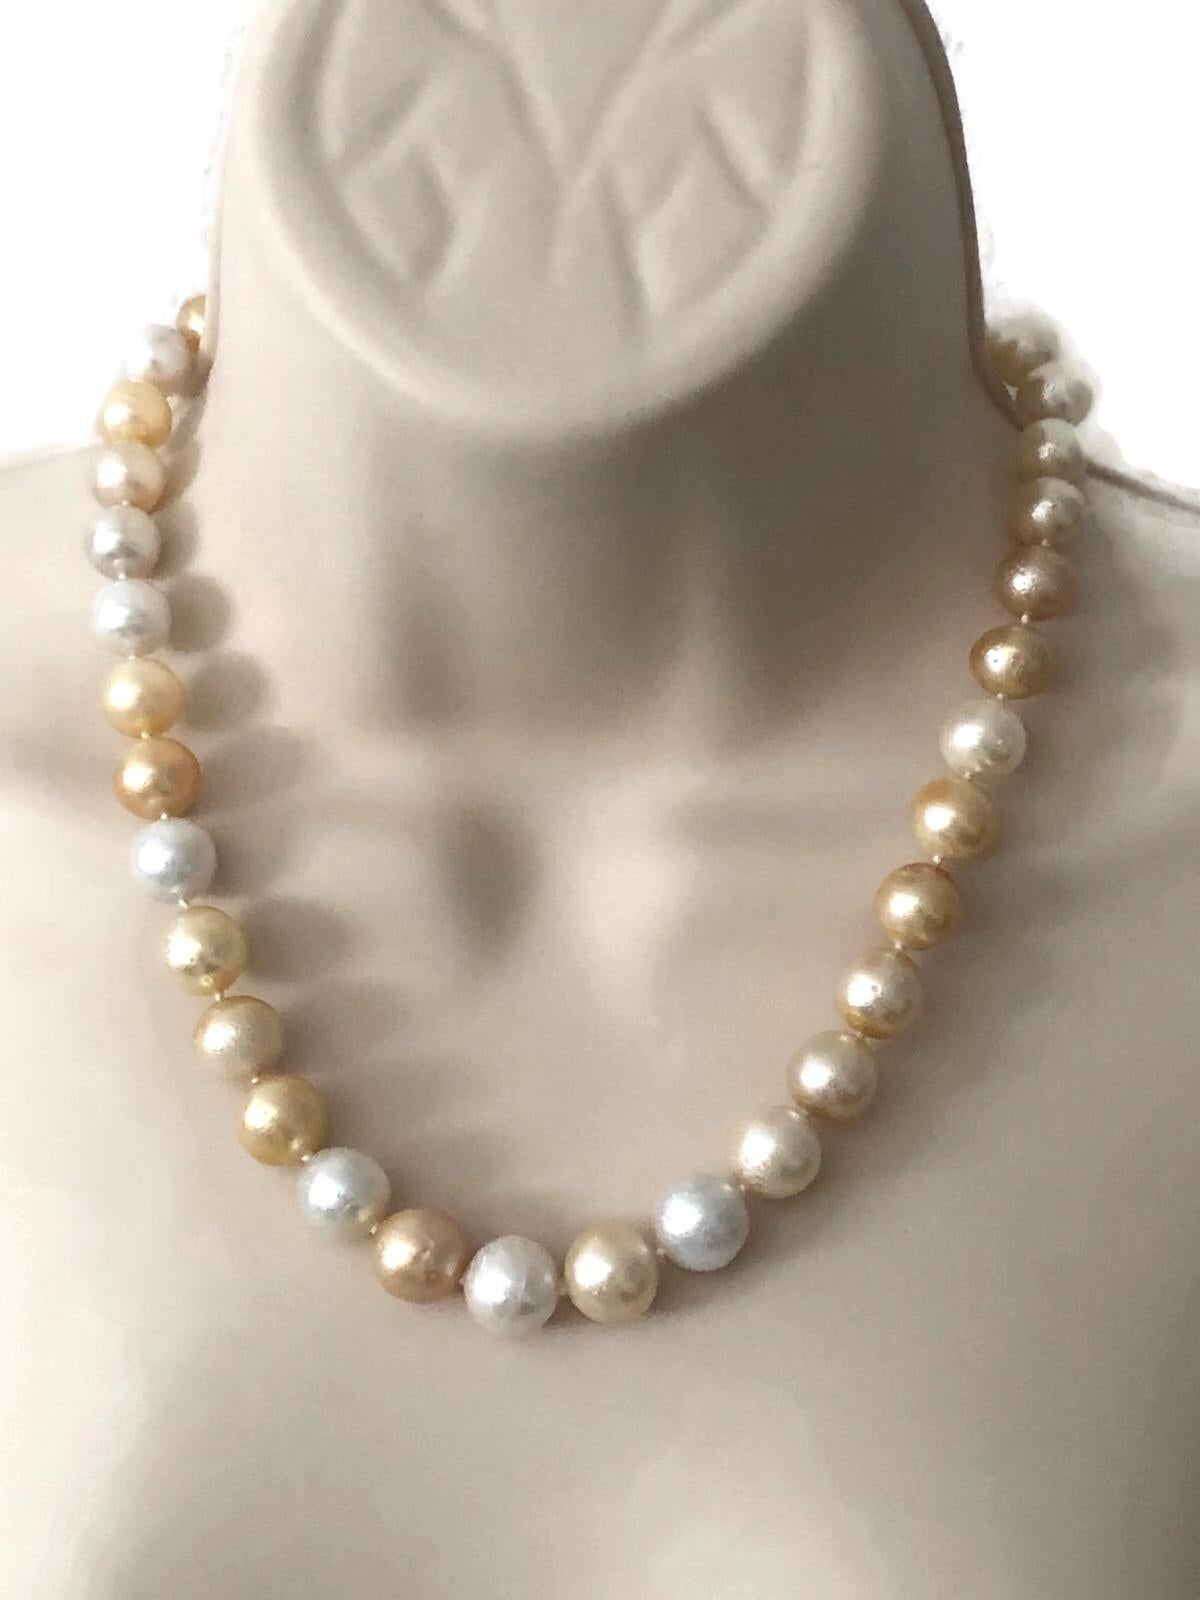 Golden and White South Sea Pearl Necklace with a 14 Karat Gold Diamond Clasp For Sale 1